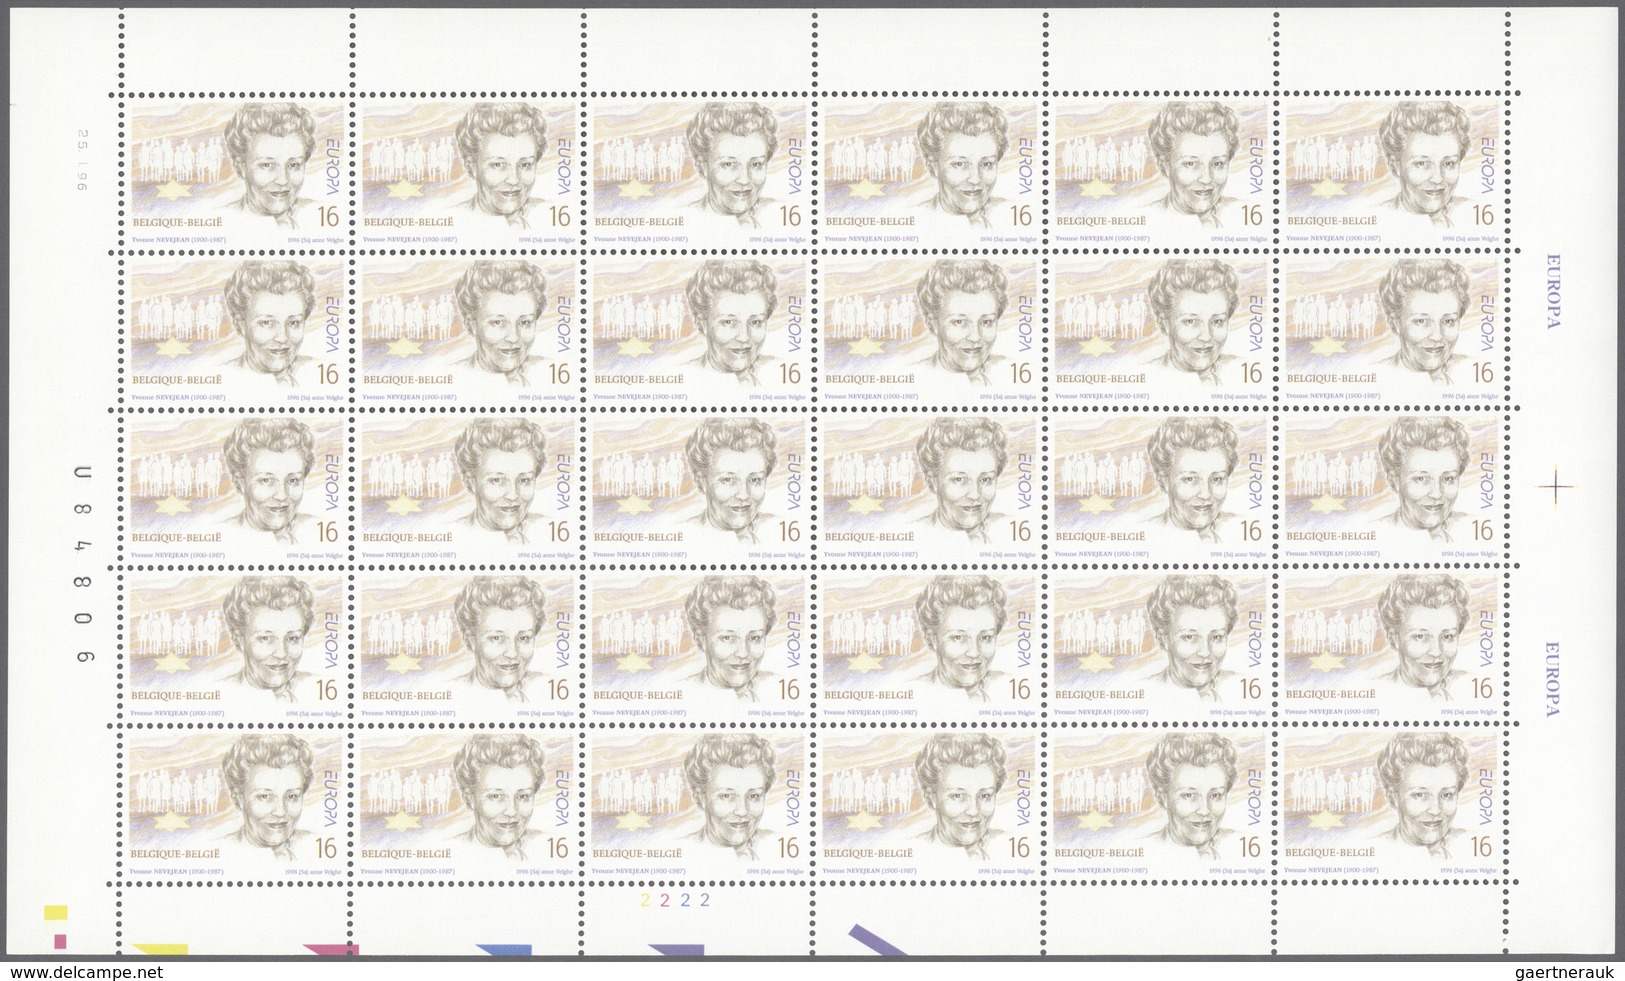 26126 Belgien: 1994/2000, all Europa issues of these years in sheets of 30 stamps each, mint never hinged.